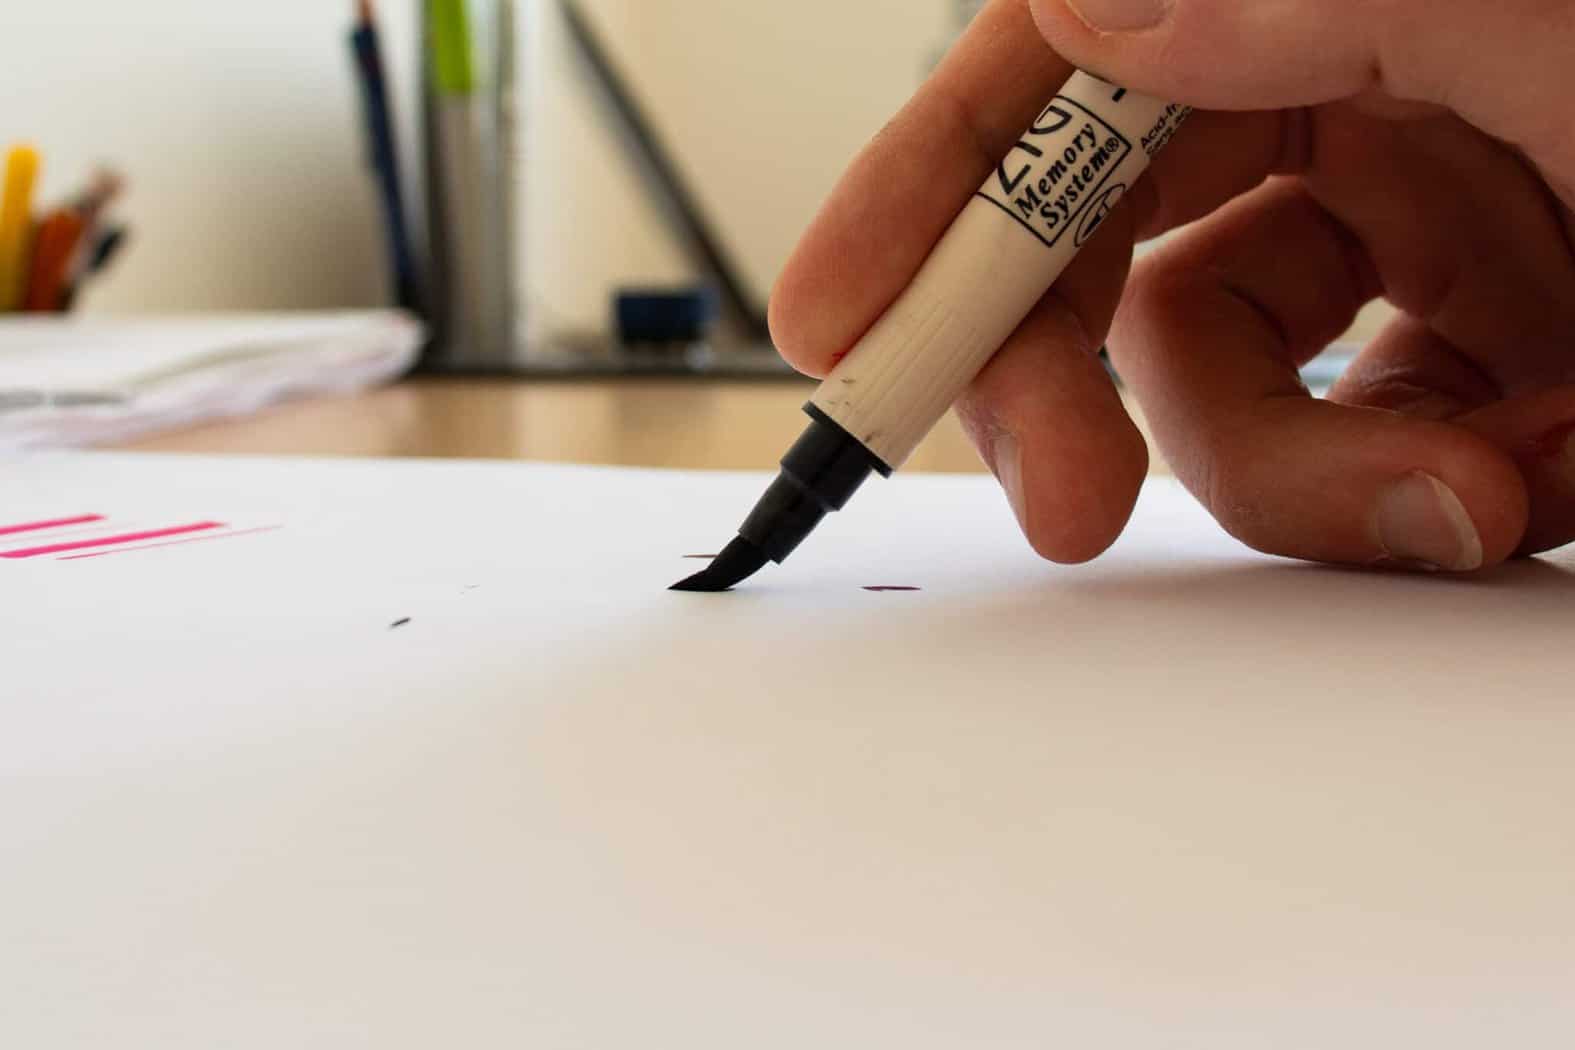 https://www.lettering-daily.com/wp-content/uploads/2020/06/Best-brush-pens-for-calligraphy-beginners-Lettering-Daily-16-scaled.jpg